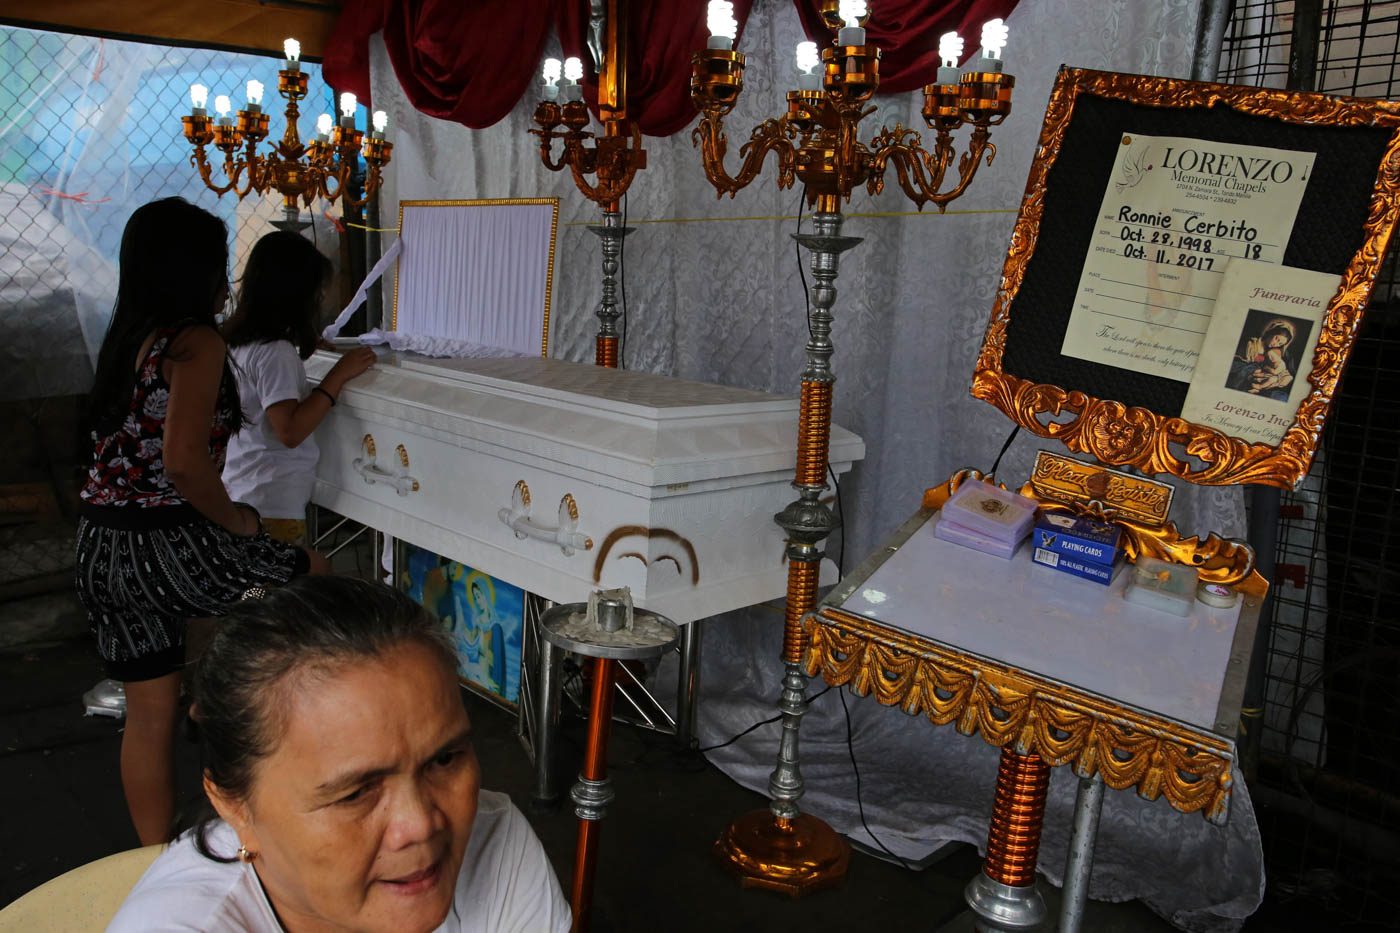 ANOTHER TEENAGER. Relatives and friends of Ronnie Cerbito pay their respects at his wake. He was abandoned as a child. His parents don't know that he is dead. Photo by Kimberly dela Cruz   